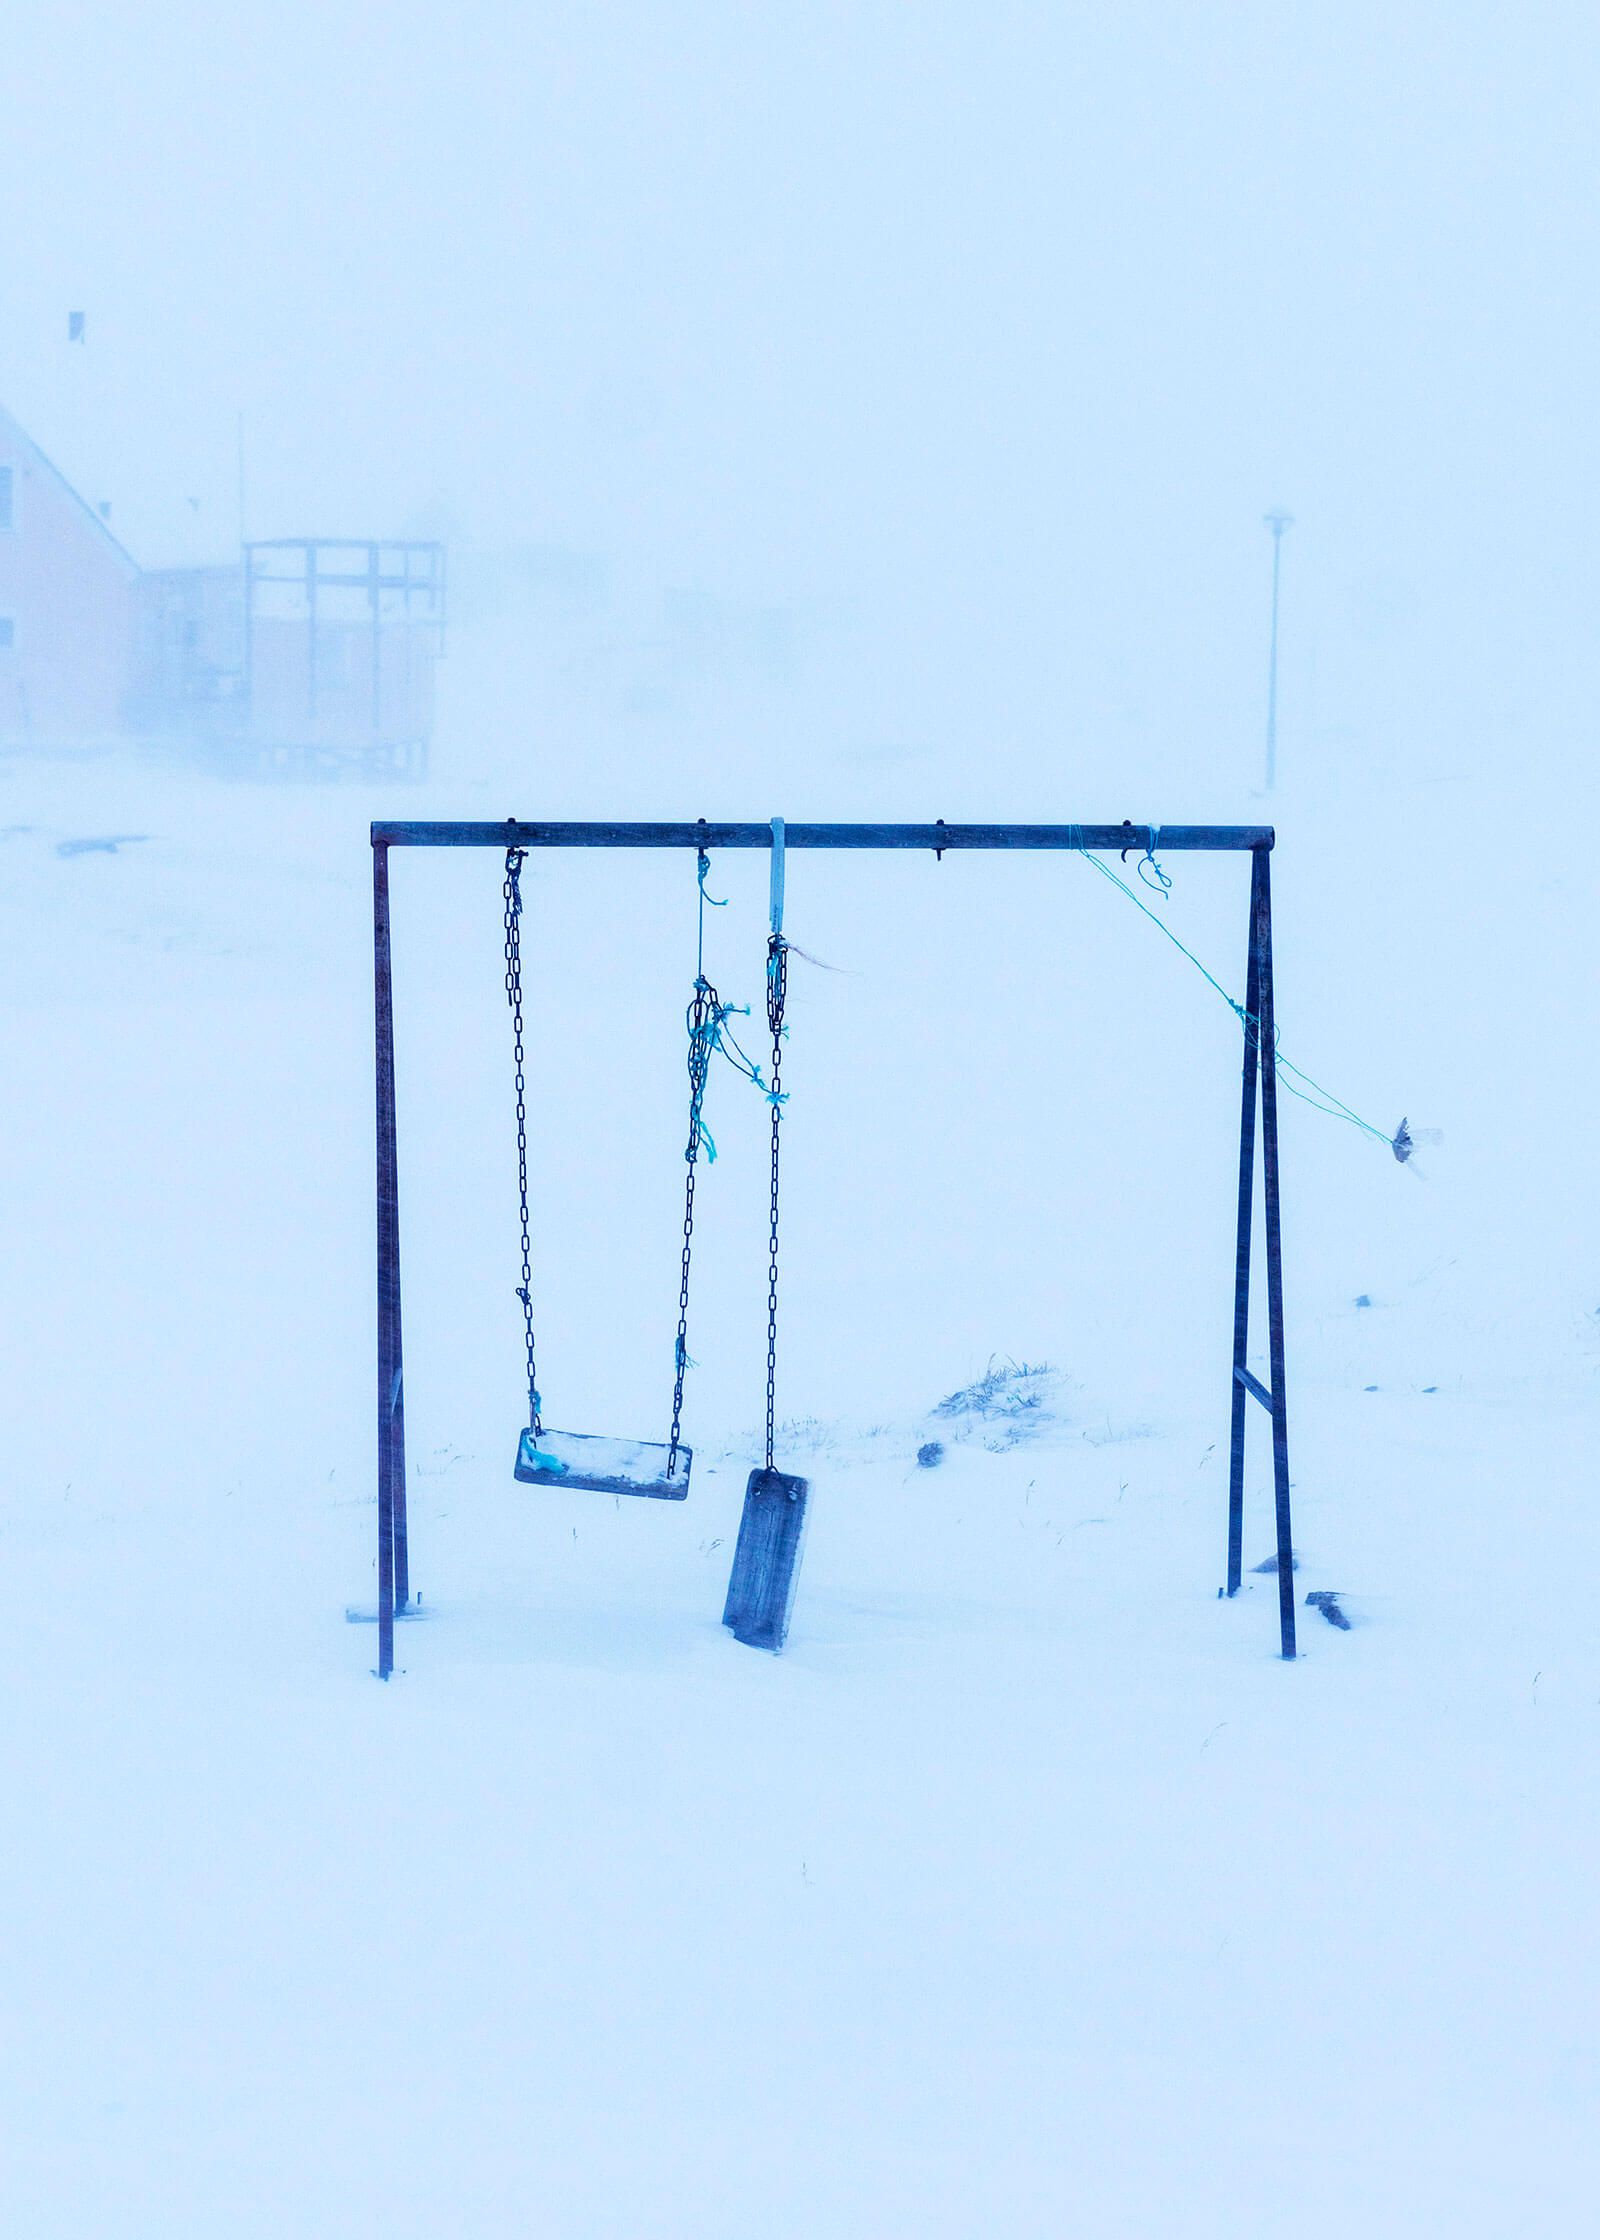 An abandoned playground swing set in the snow in Oqaatsut. Image by Jonas Bendiksen/Magnum Photos. Greenland, 2018.